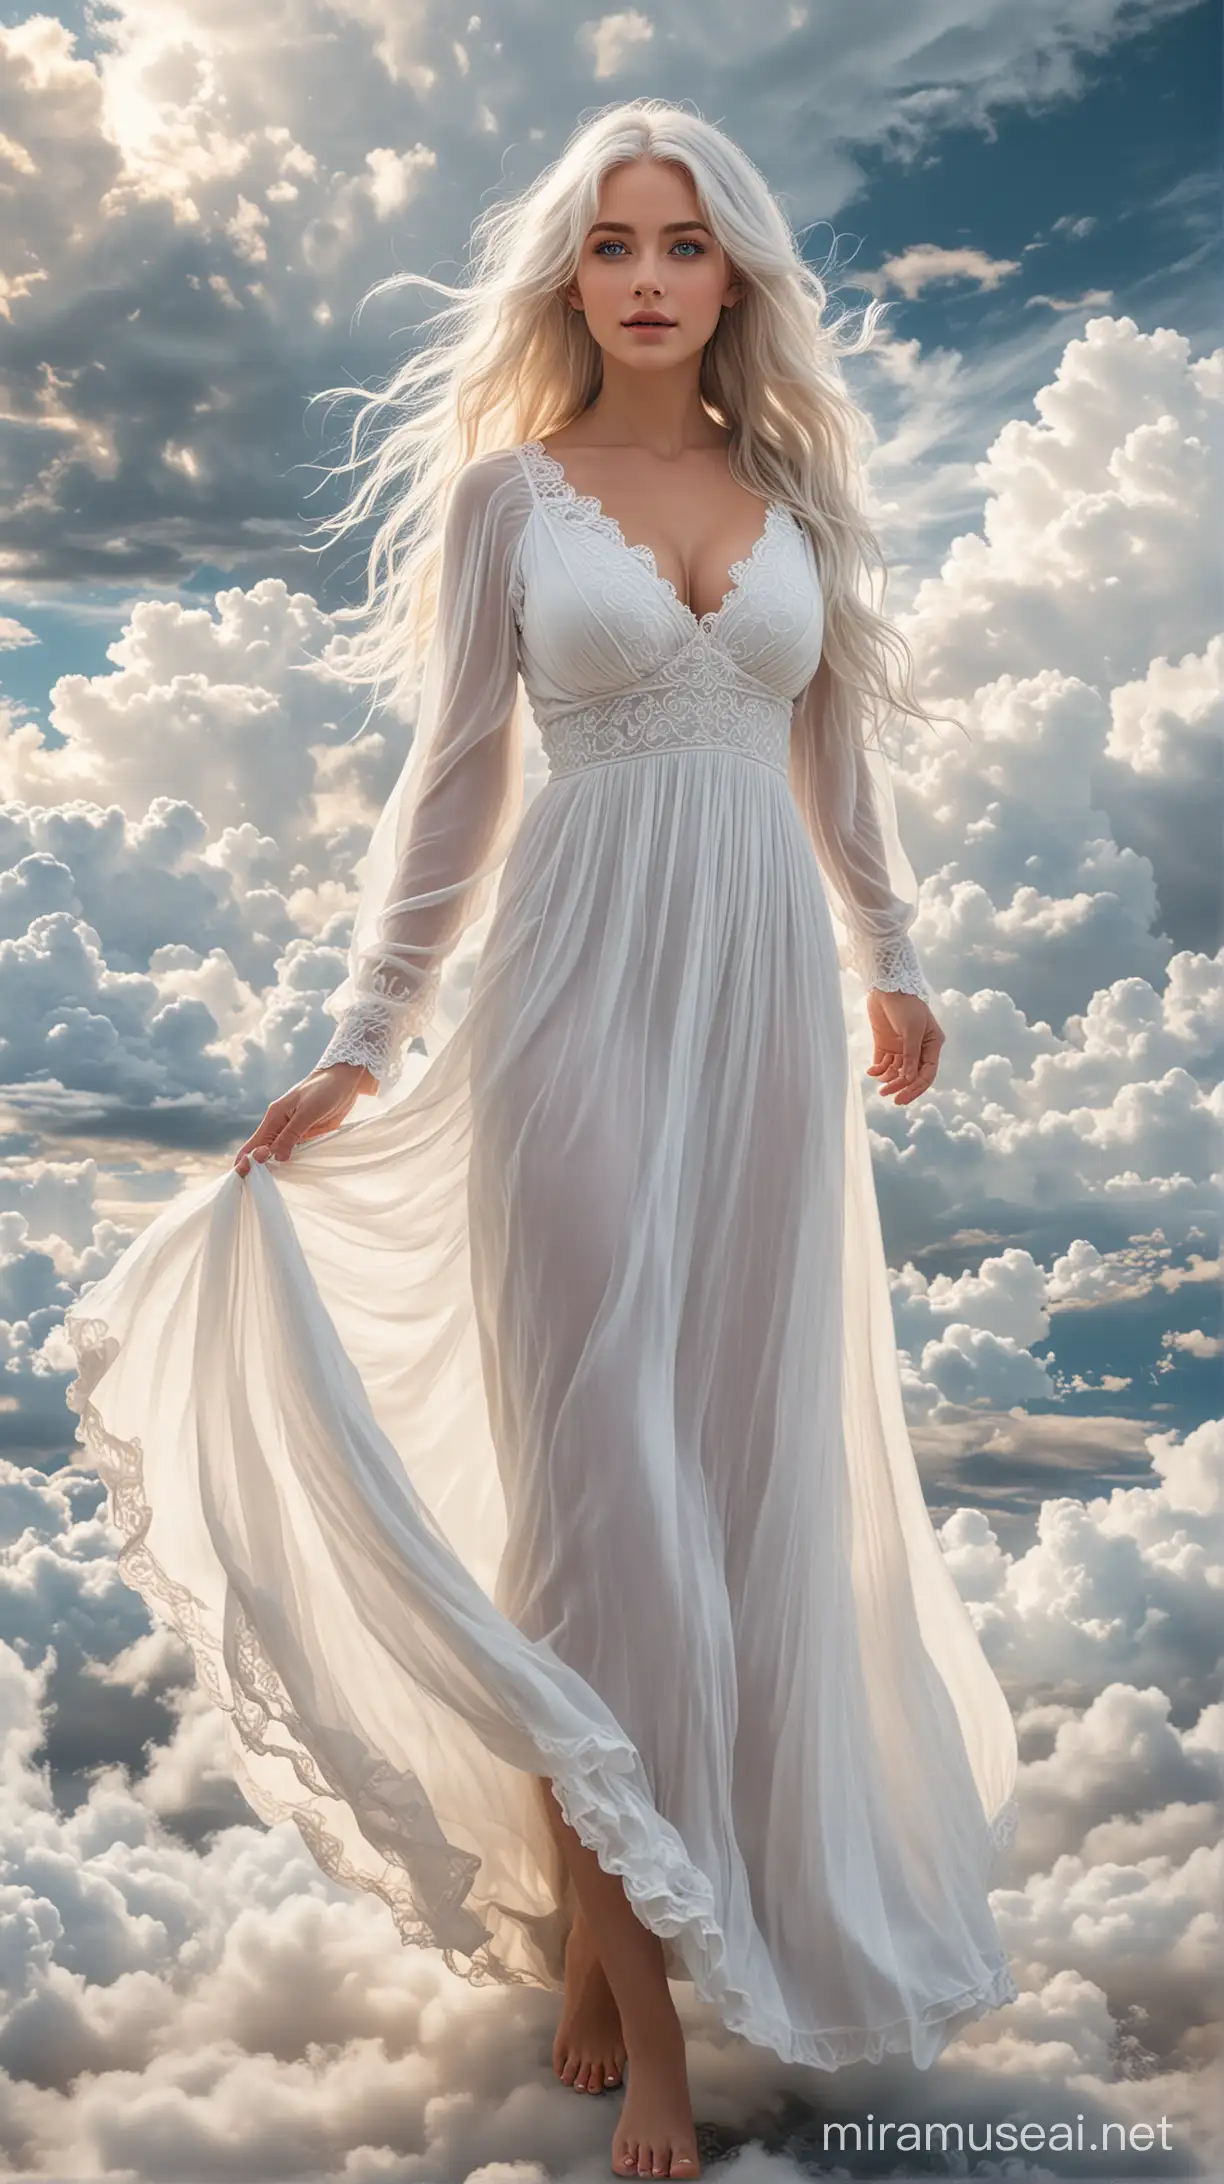 Ethereal Beauty Walking on Clouds Enchanting Whitehaired Woman in Flowing Dress